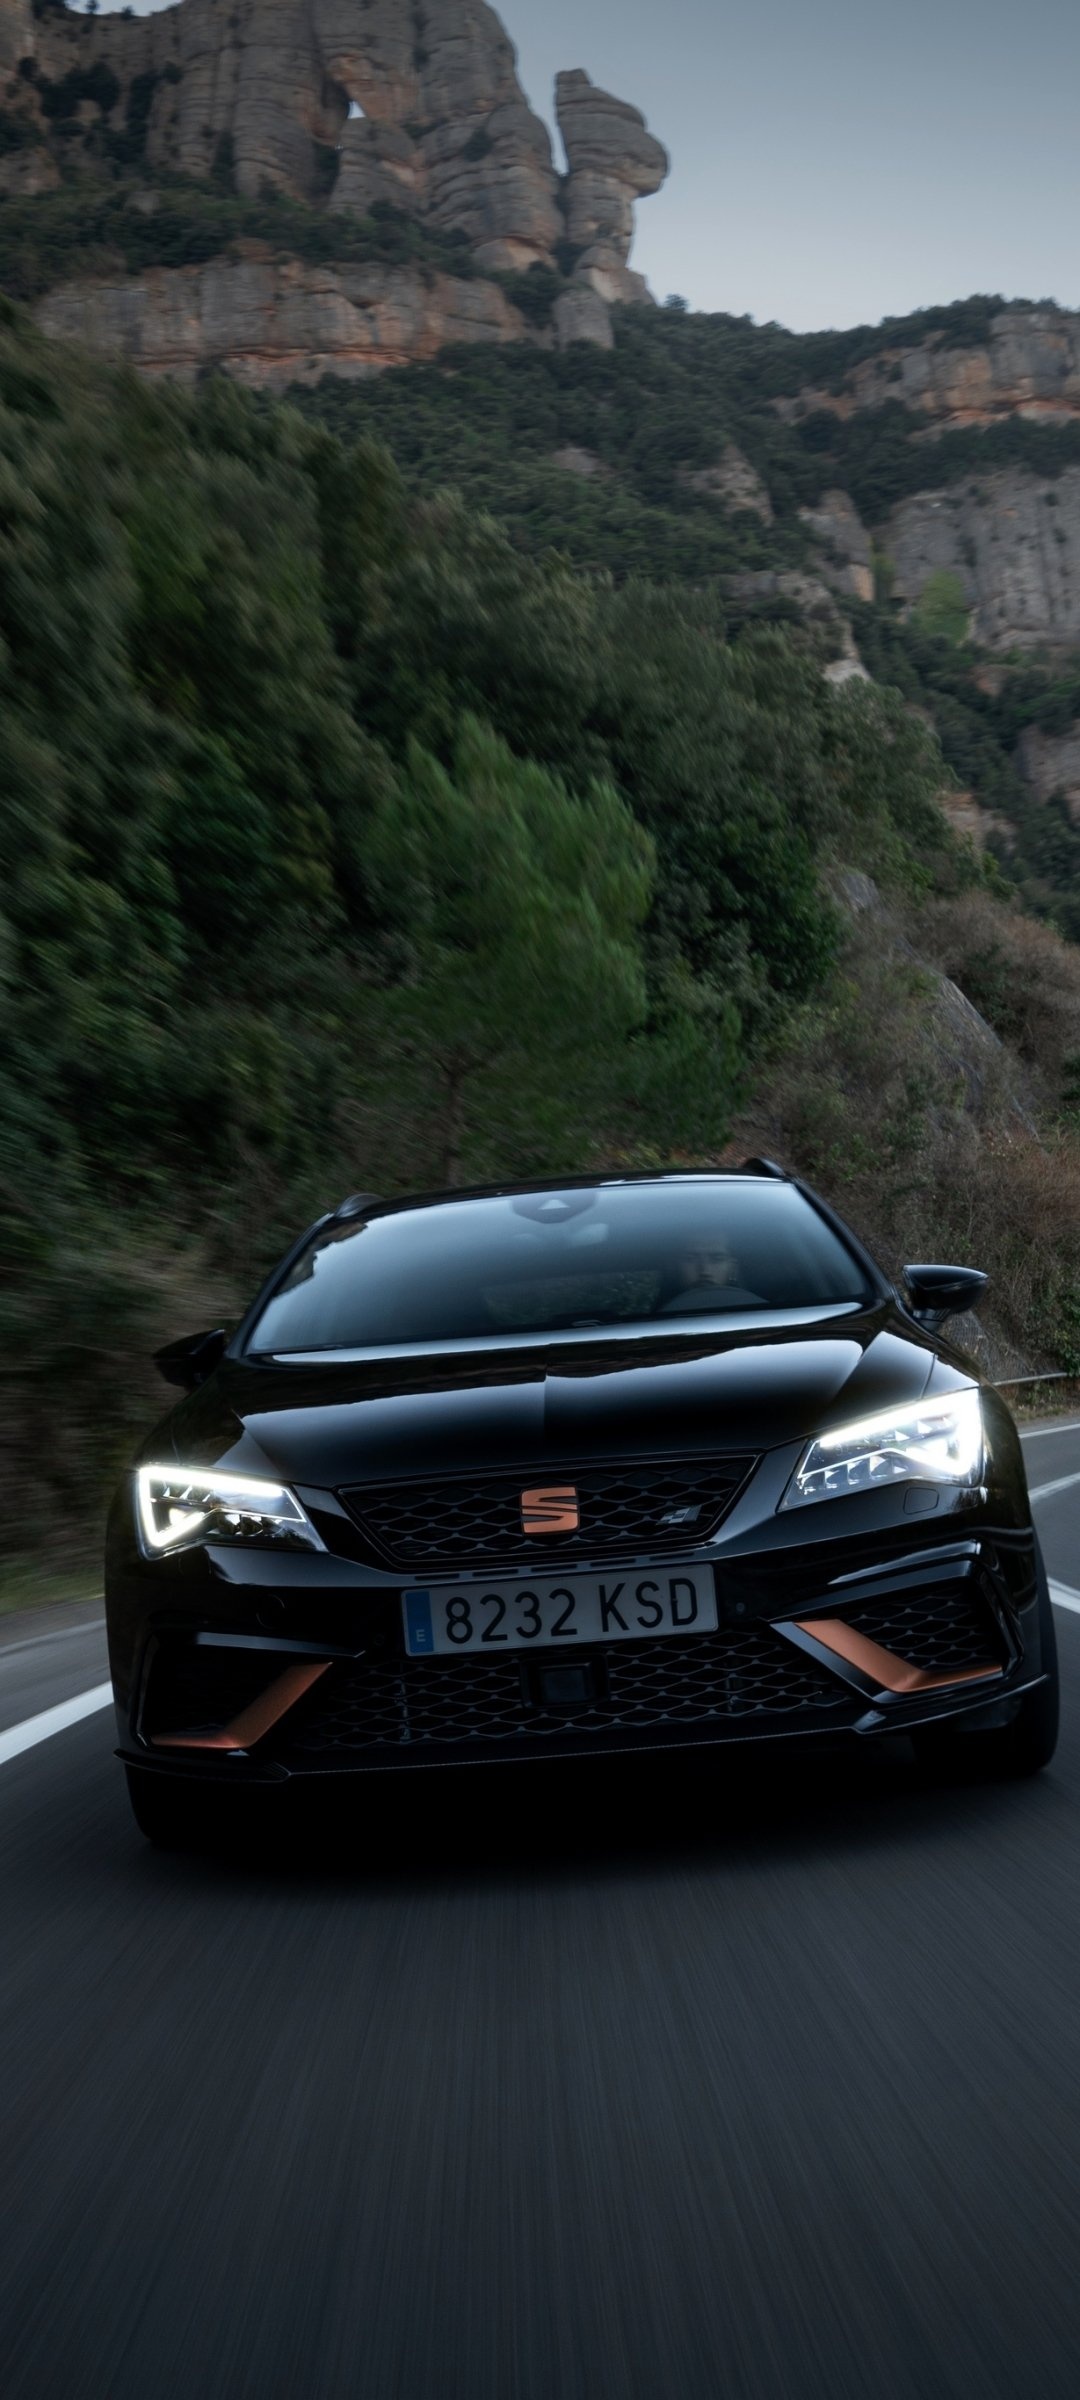 Seat vehicles, Leon model, Automotive excellence, Sporty style, 1080x2400 HD Phone